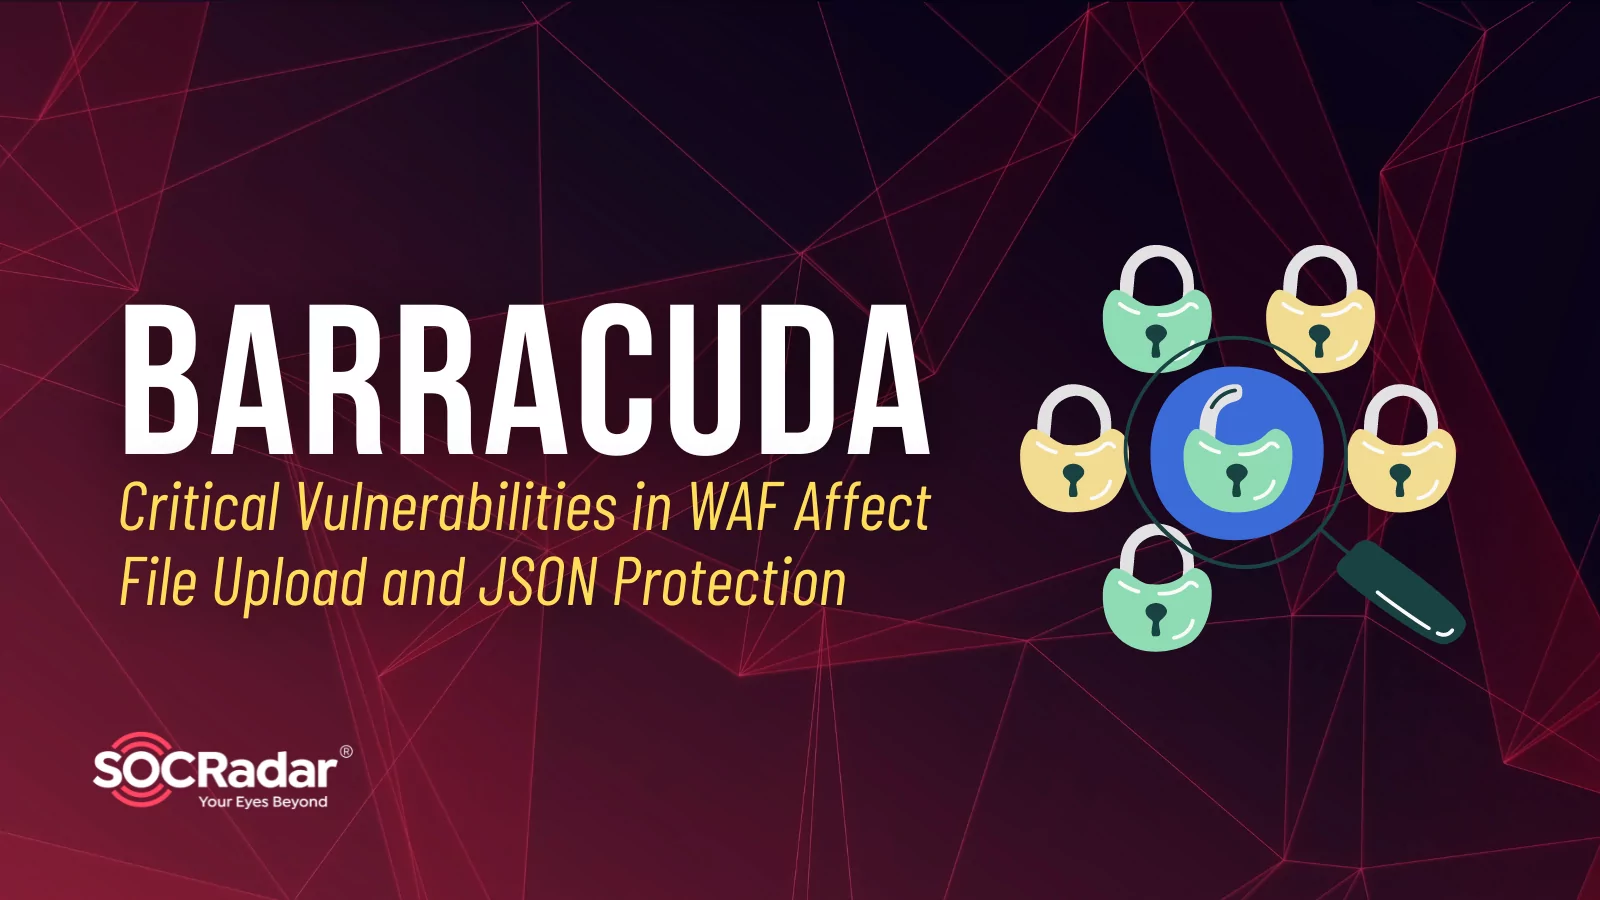 SOCRadar® Cyber Intelligence Inc. | Barracuda Disclosed Critical Vulnerabilities in WAF, Affecting File Upload and JSON Protection